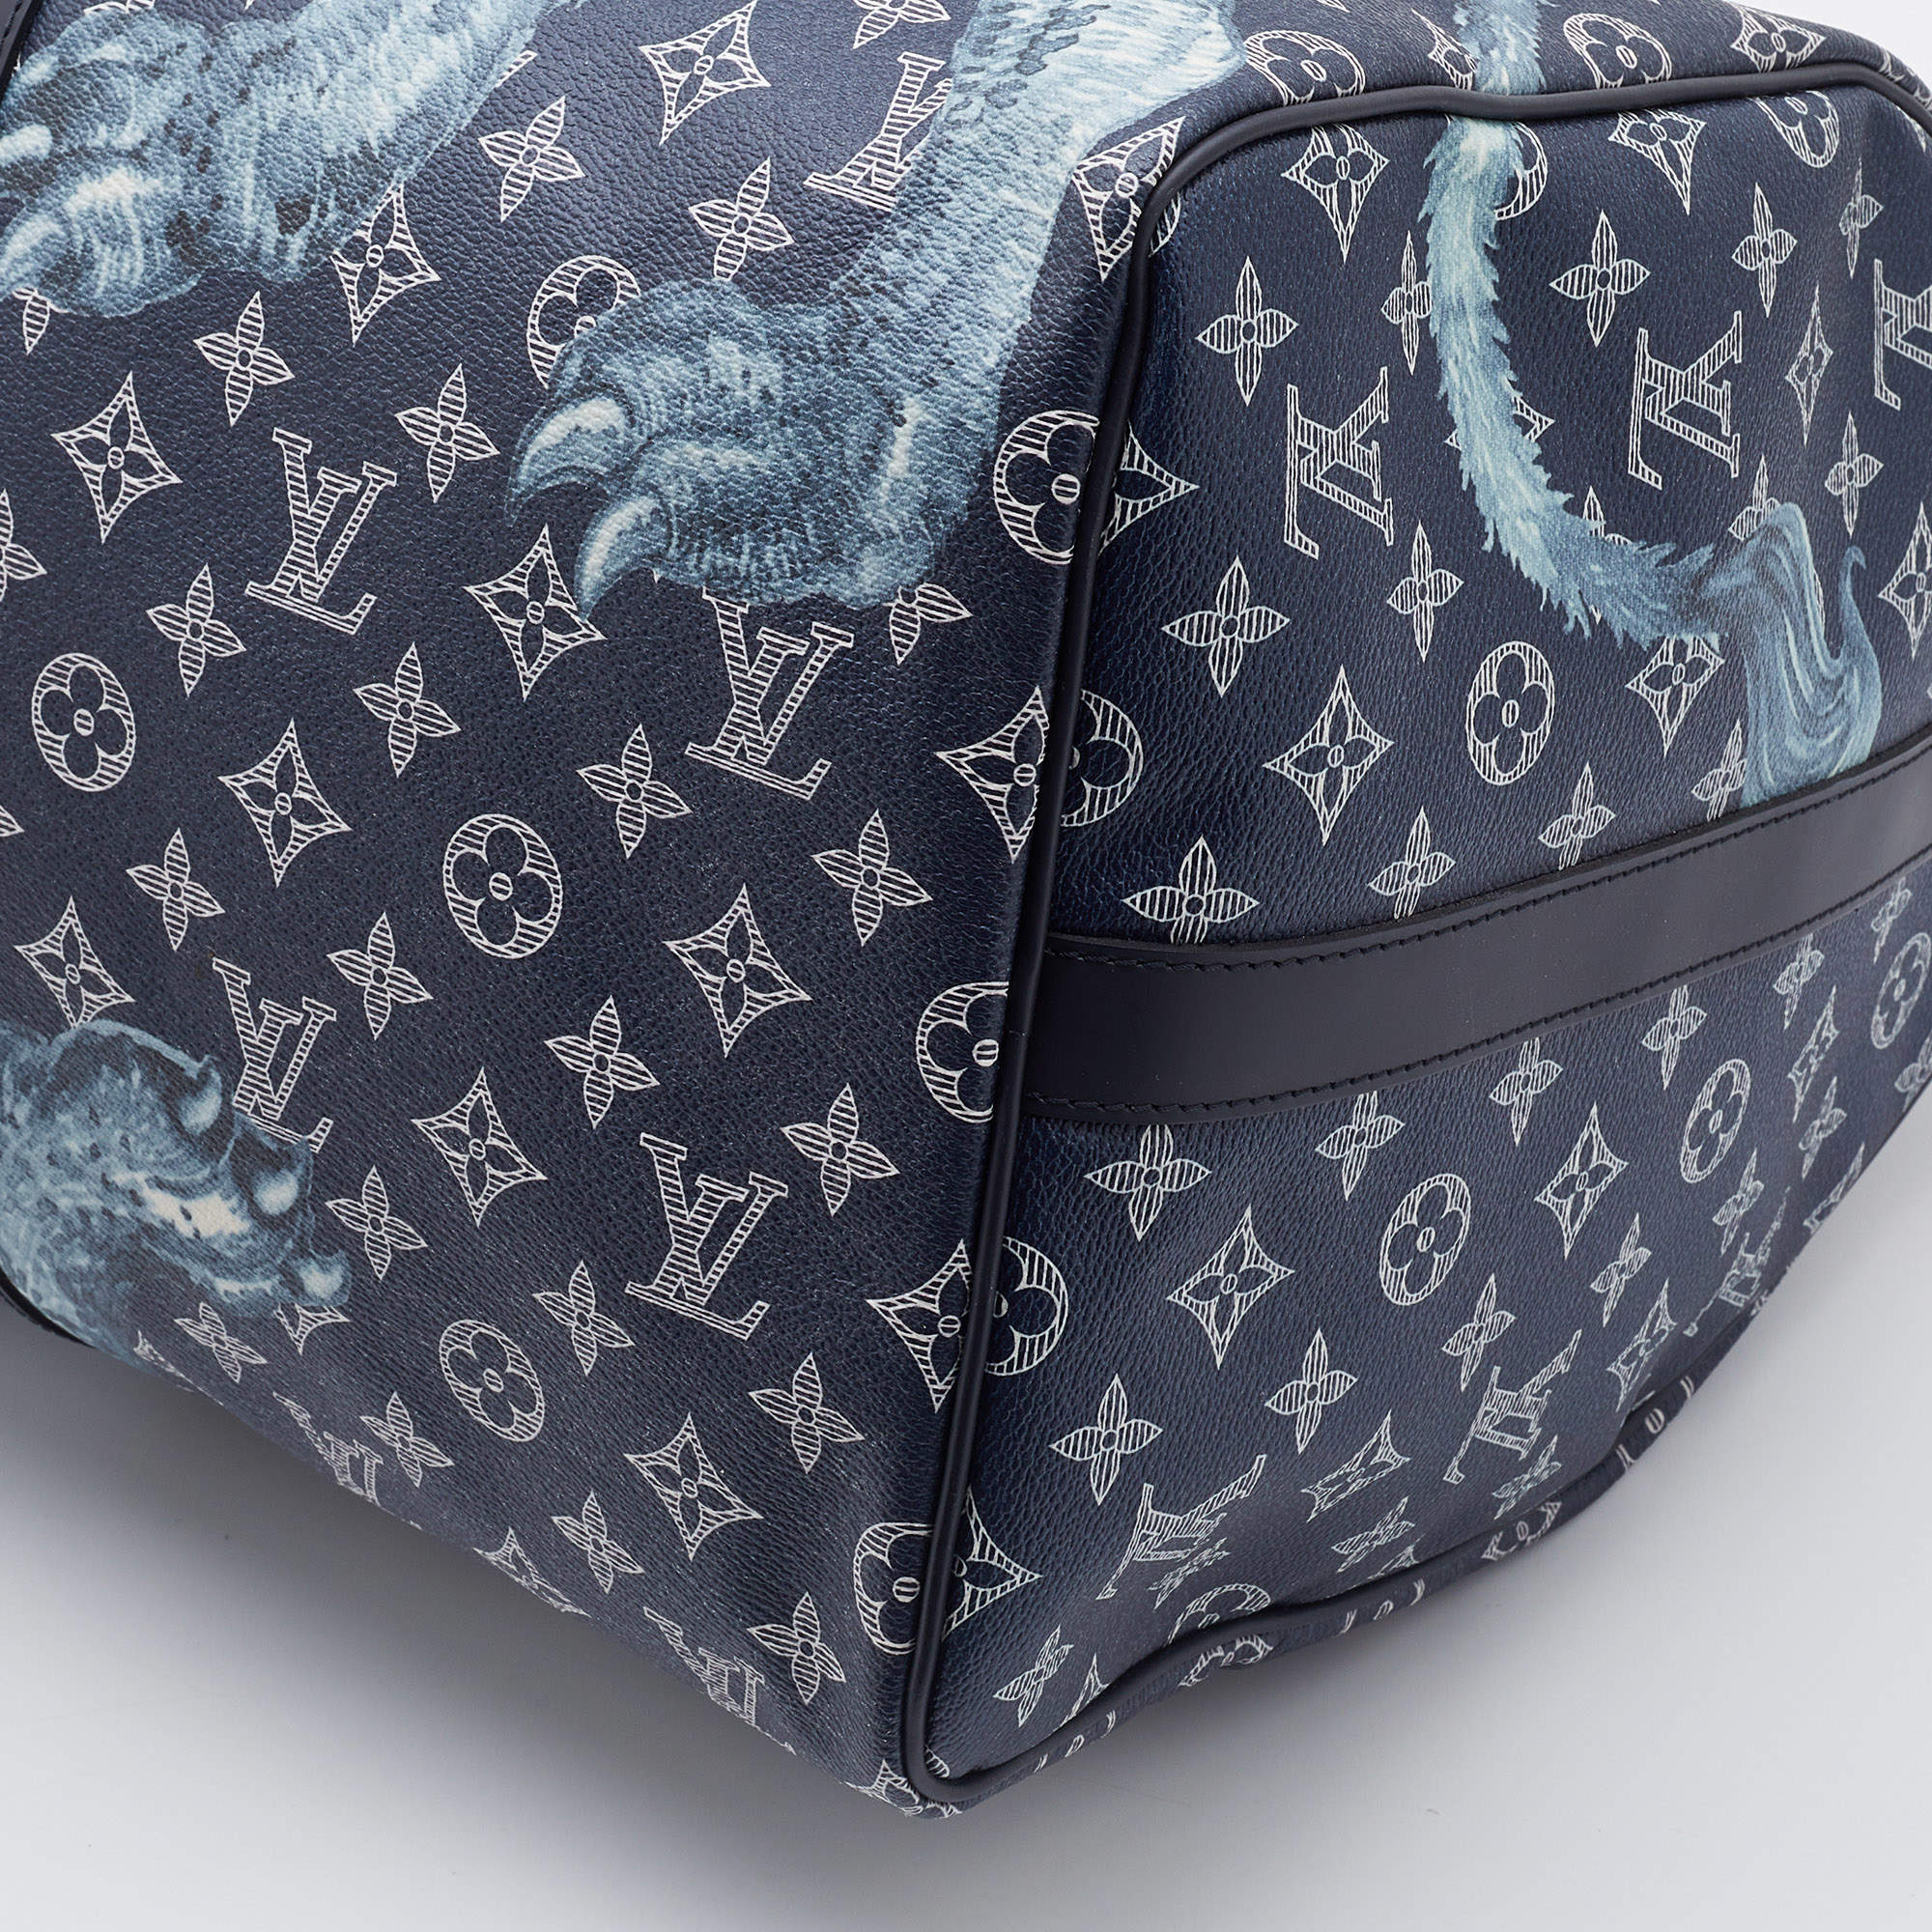 Louis Vuitton x Chapman Brothers Keepall Bandouliere Monogram